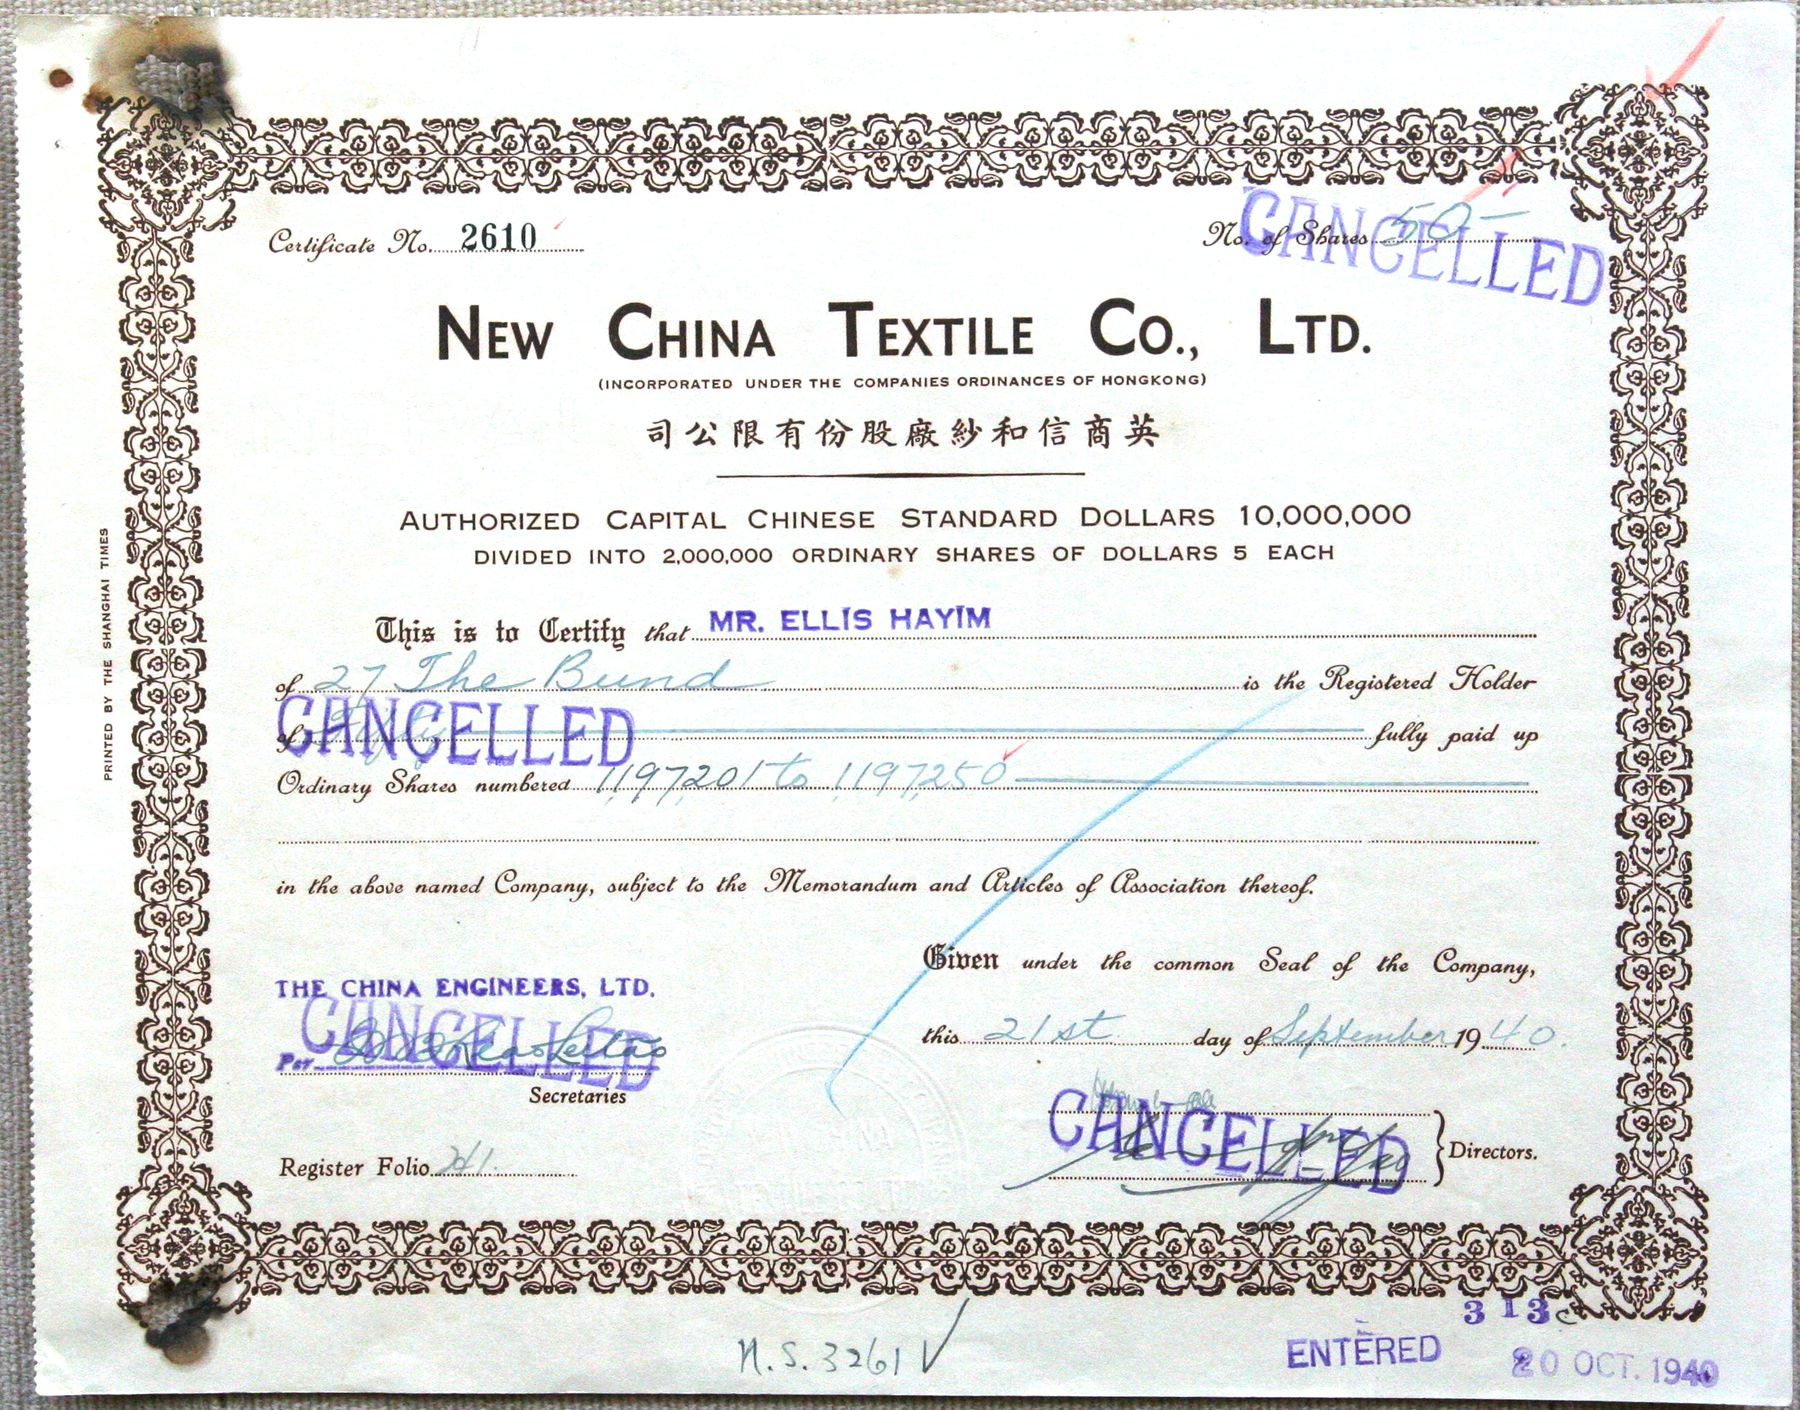 S1220, New China Textile Co., Stock Certificate of 1941 (English)